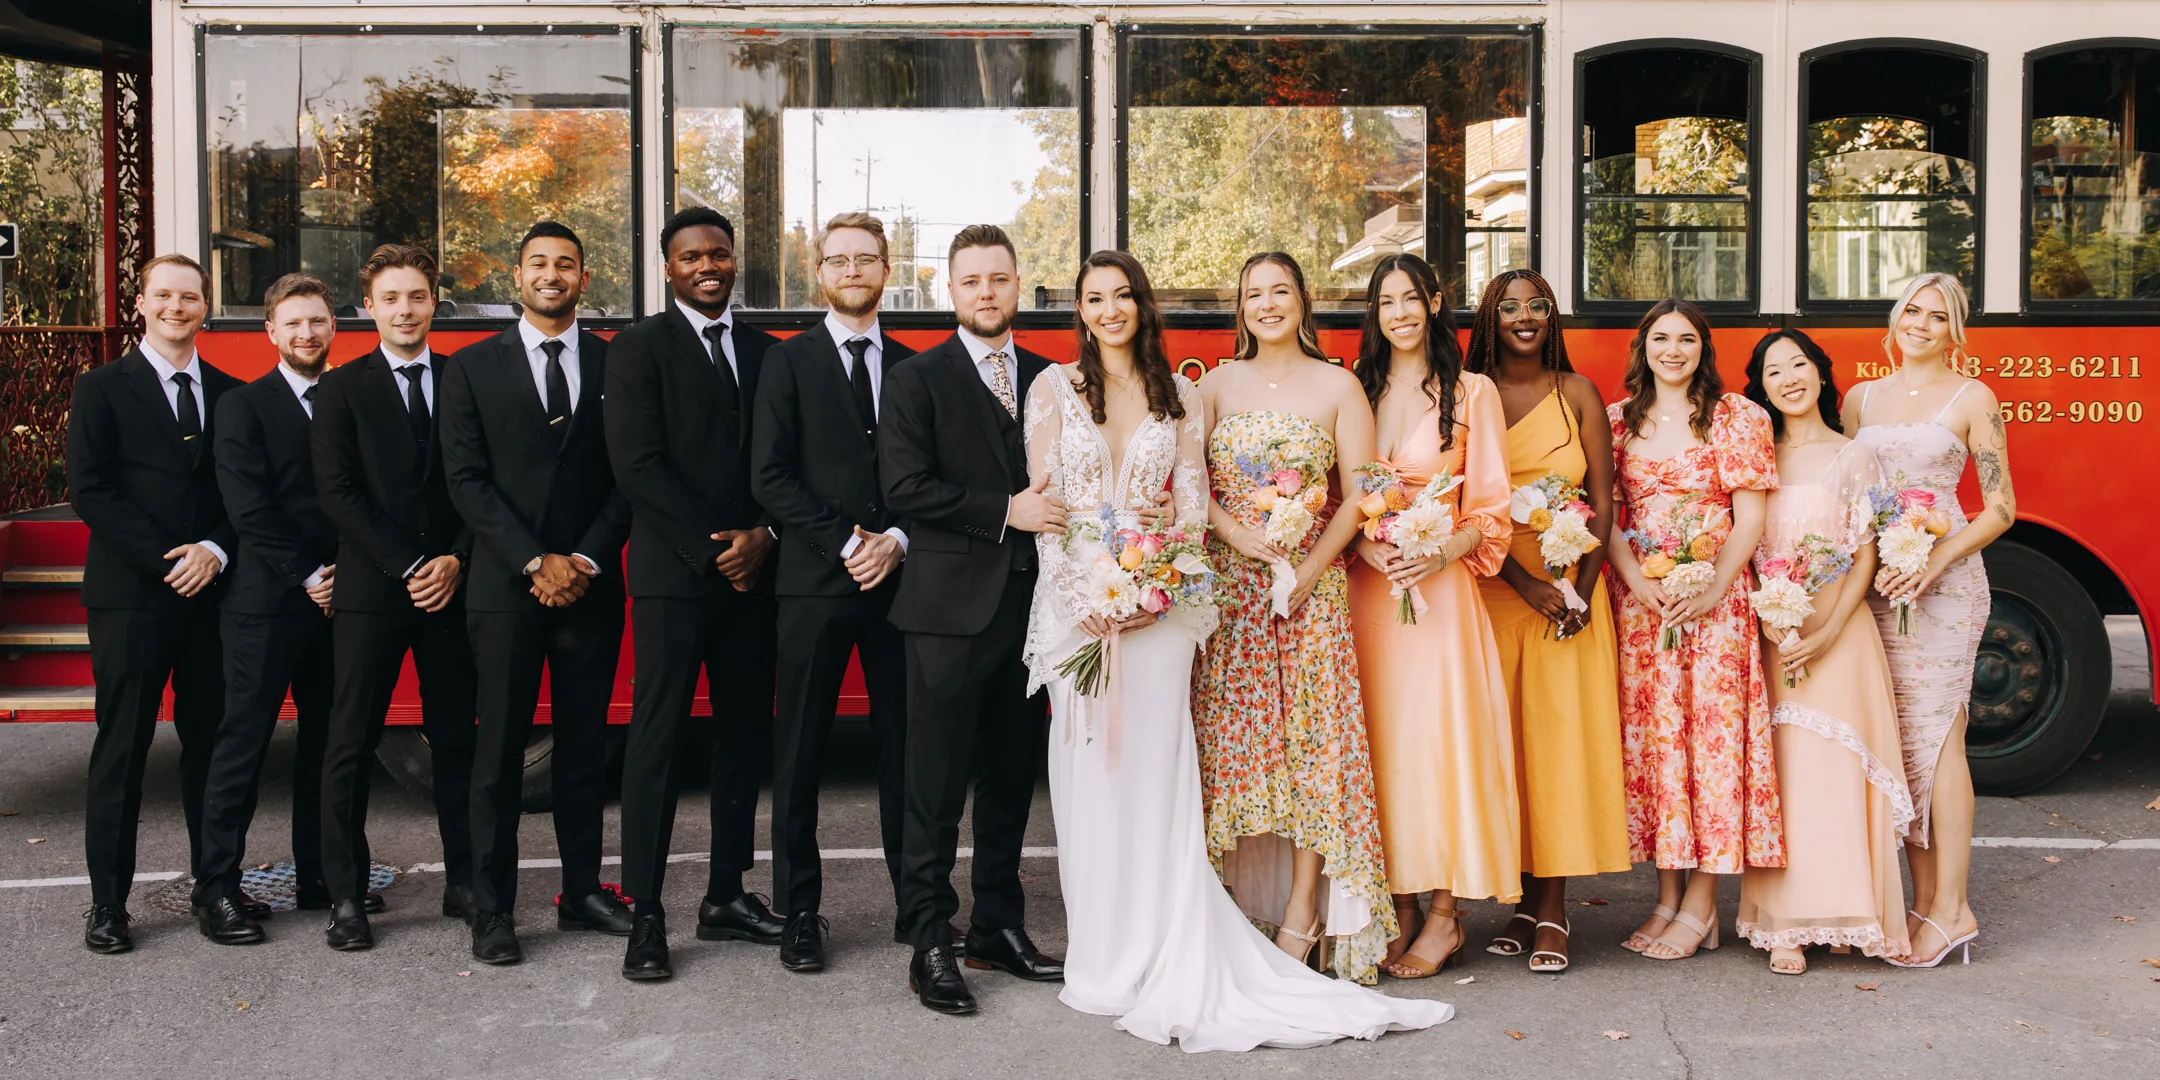 bride and groom surrounded by their groomsmen and bridesmaids standing in front of a bus